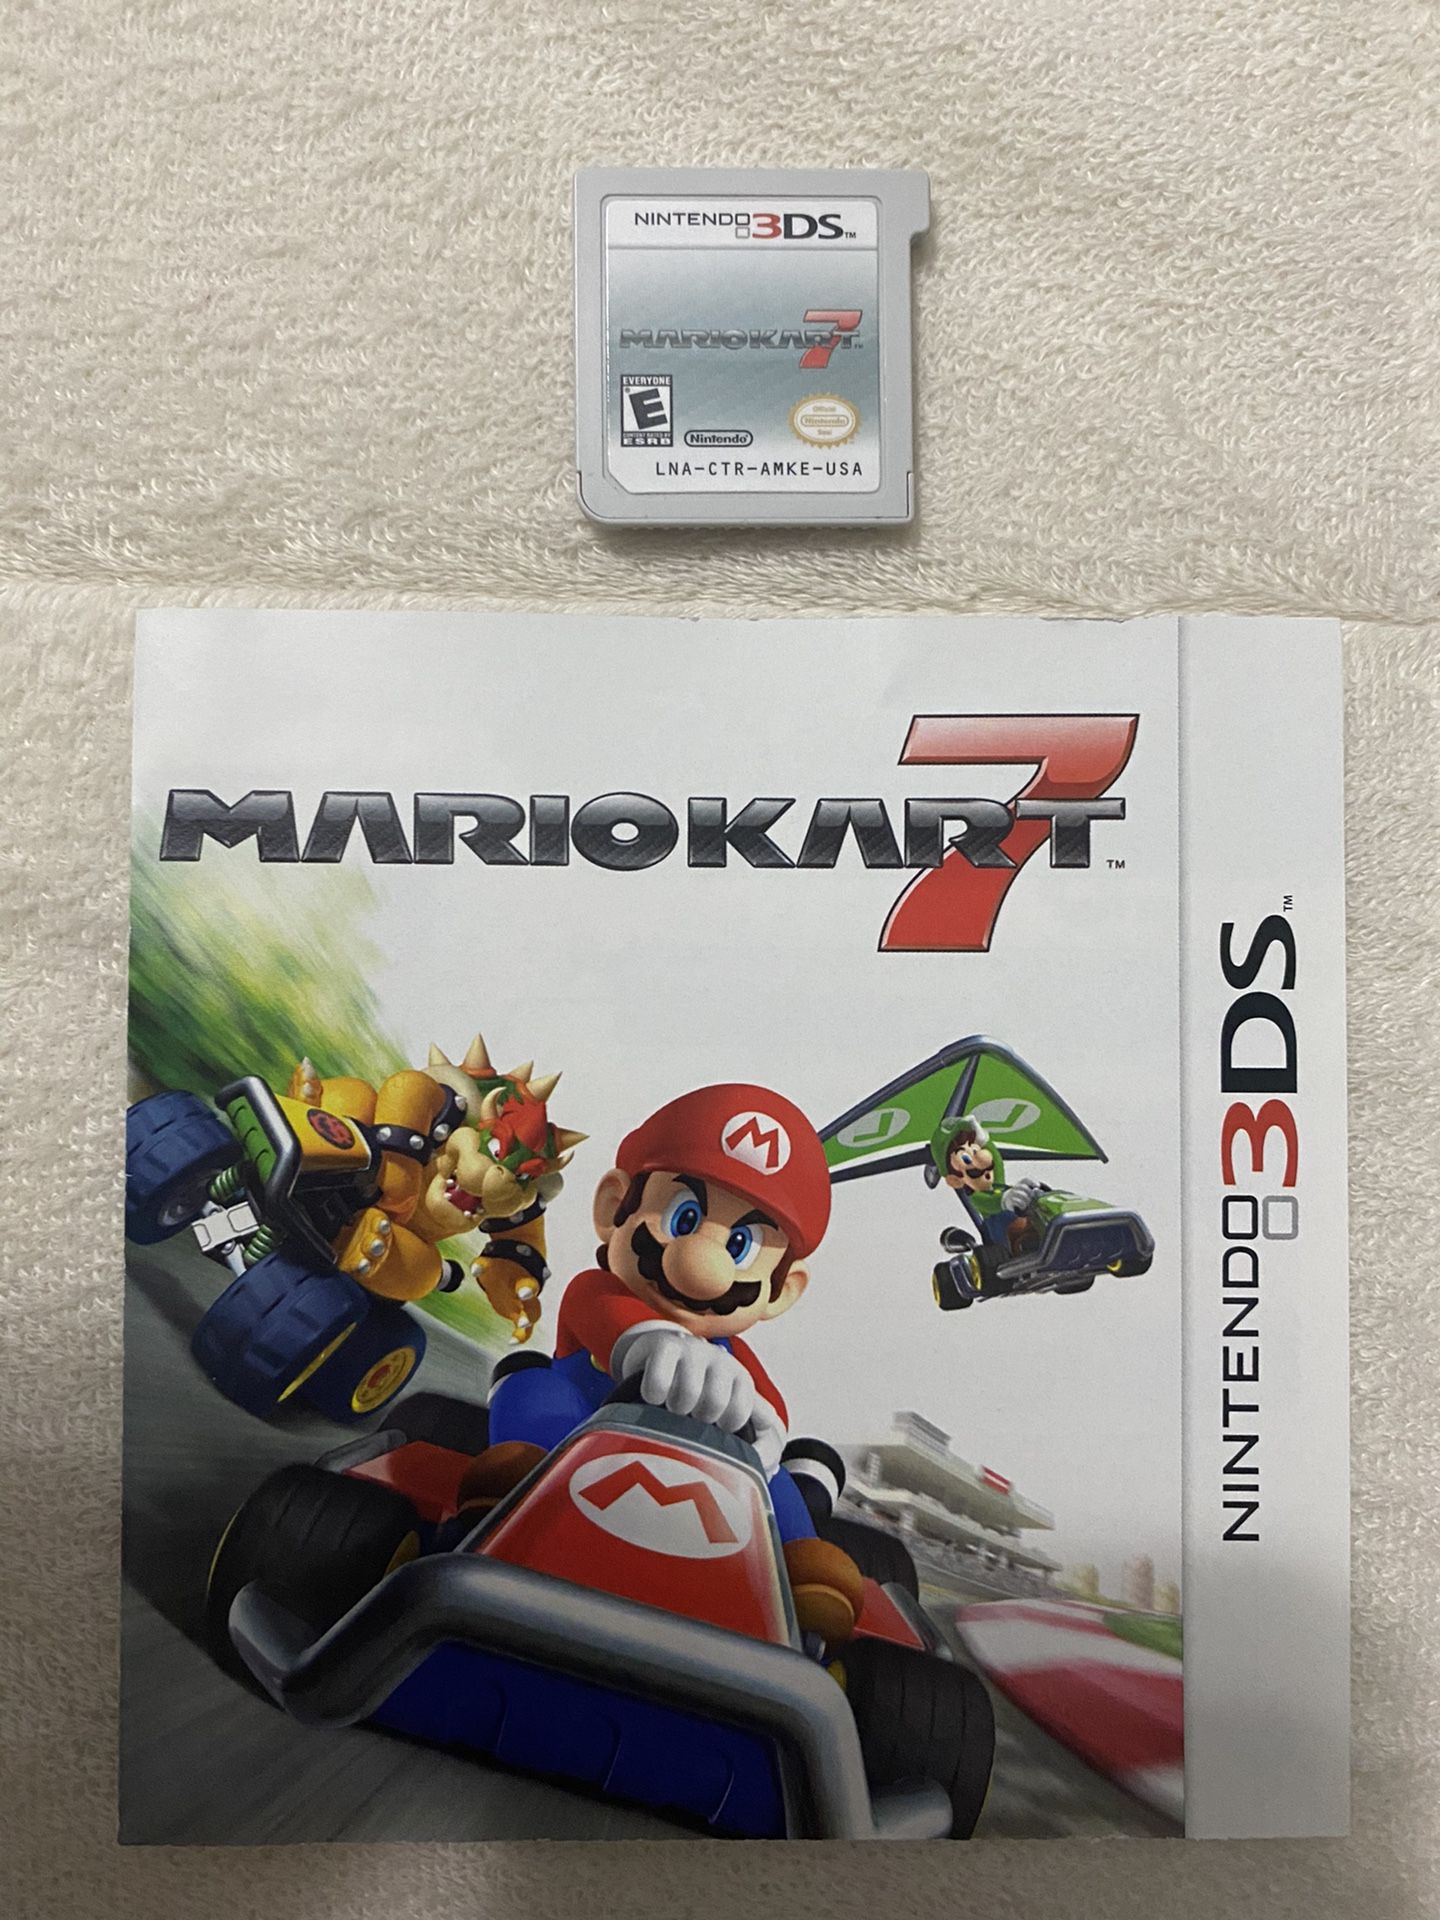 Nintendo 3DS Mario Kart 7 game and manual only